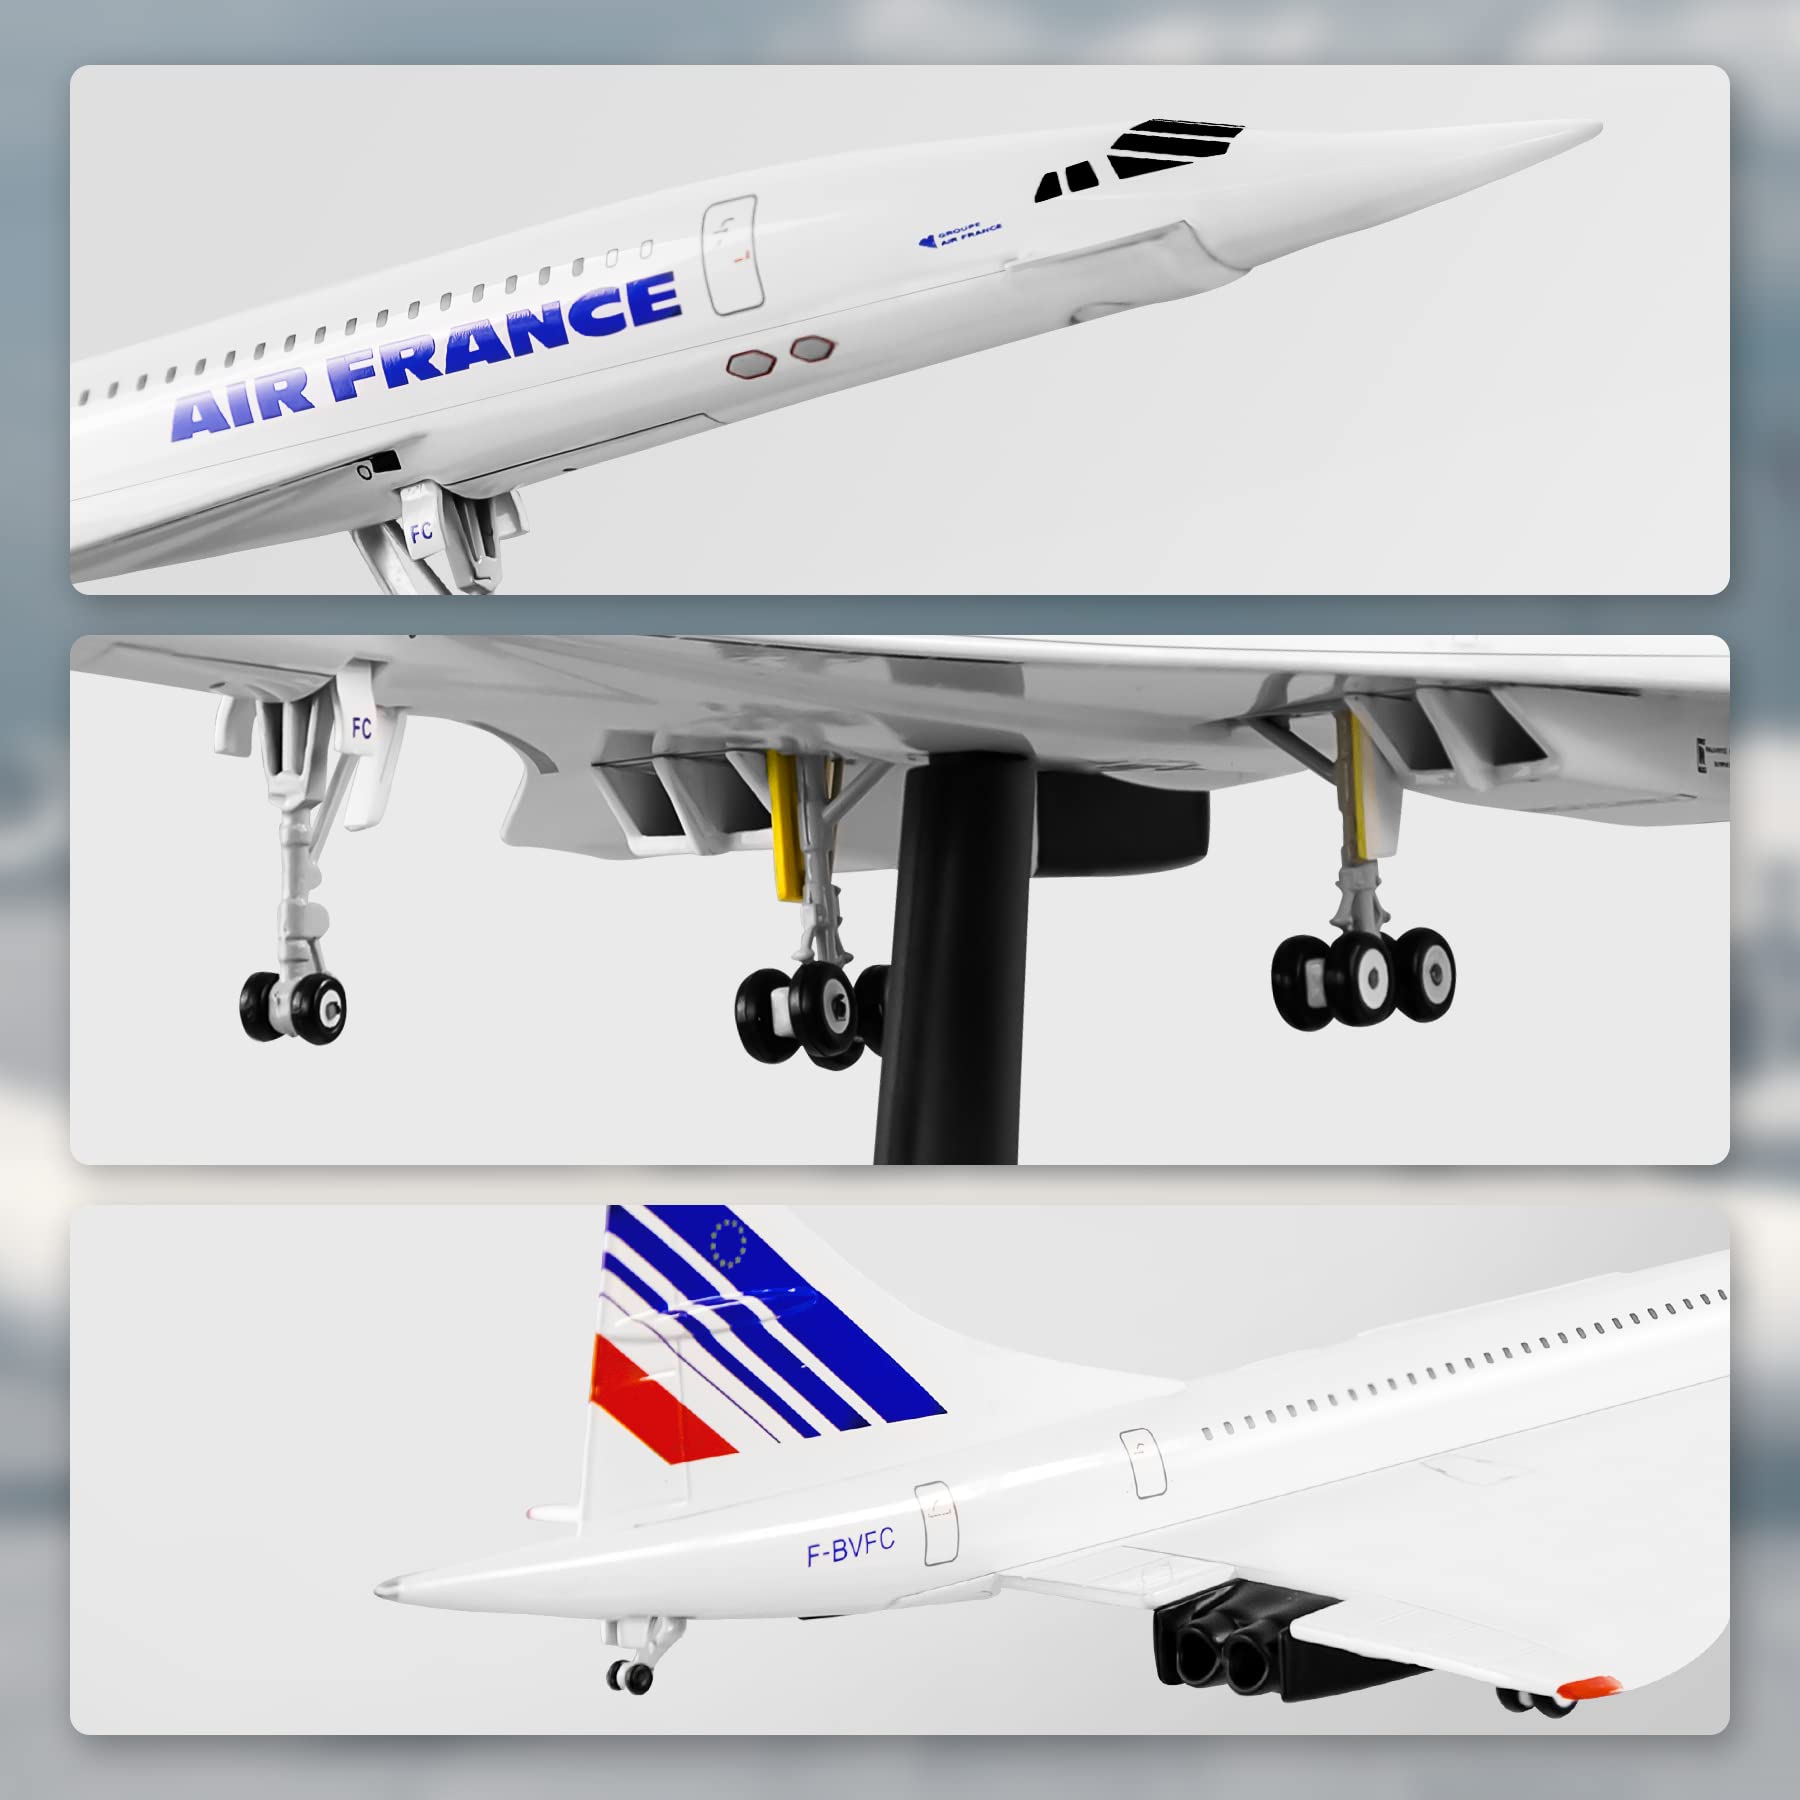 Lose Fun Park 1:200 Scale Concorde Plane Model Airplane Air France Plane F-BVFB Alloy Diecast Airplanes Model Planes for Adults Collection and Gift